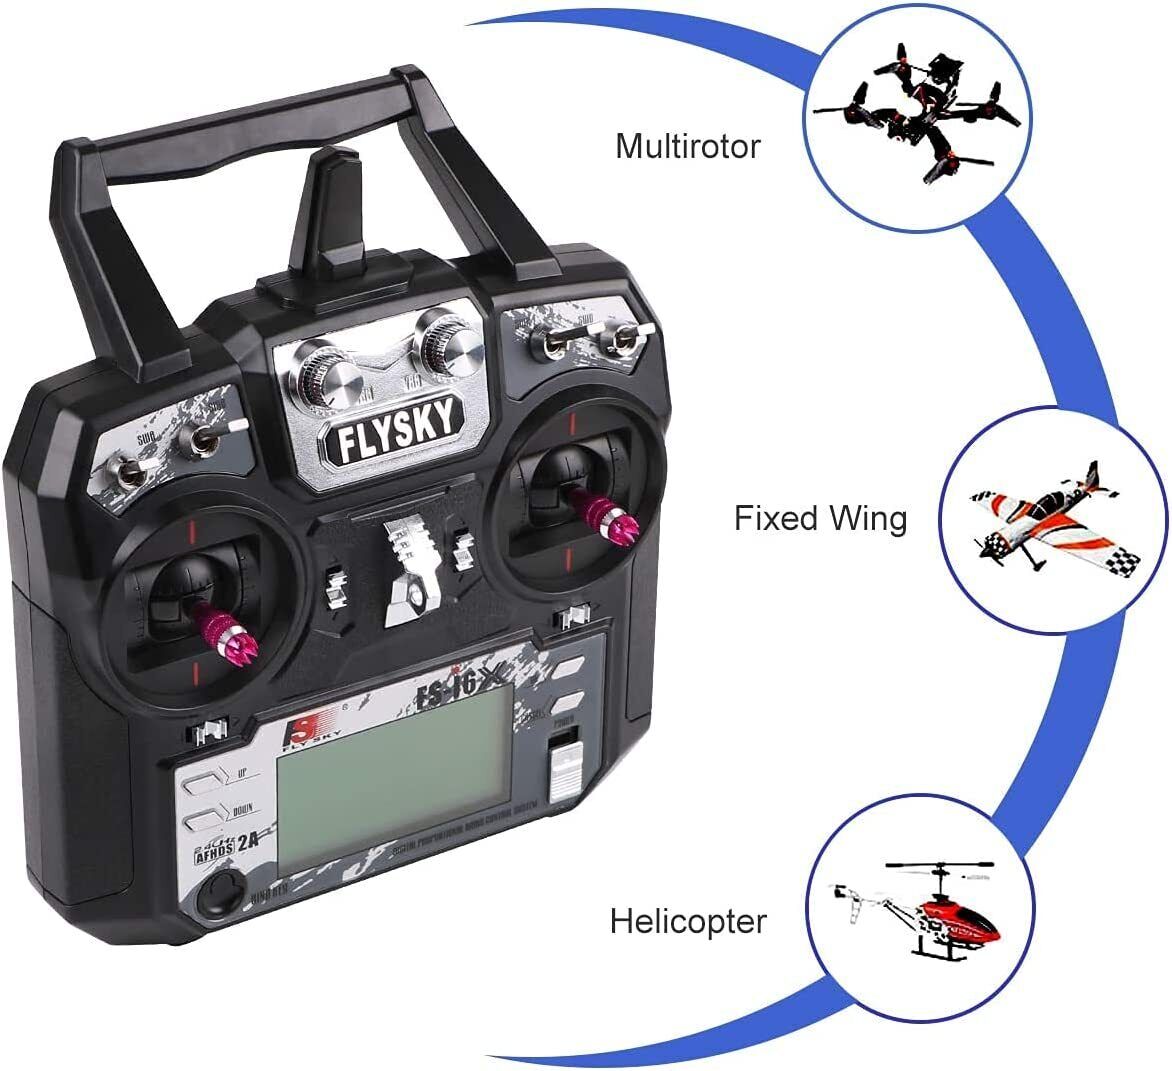 Flysky i6X transmitter for FPV racing drone